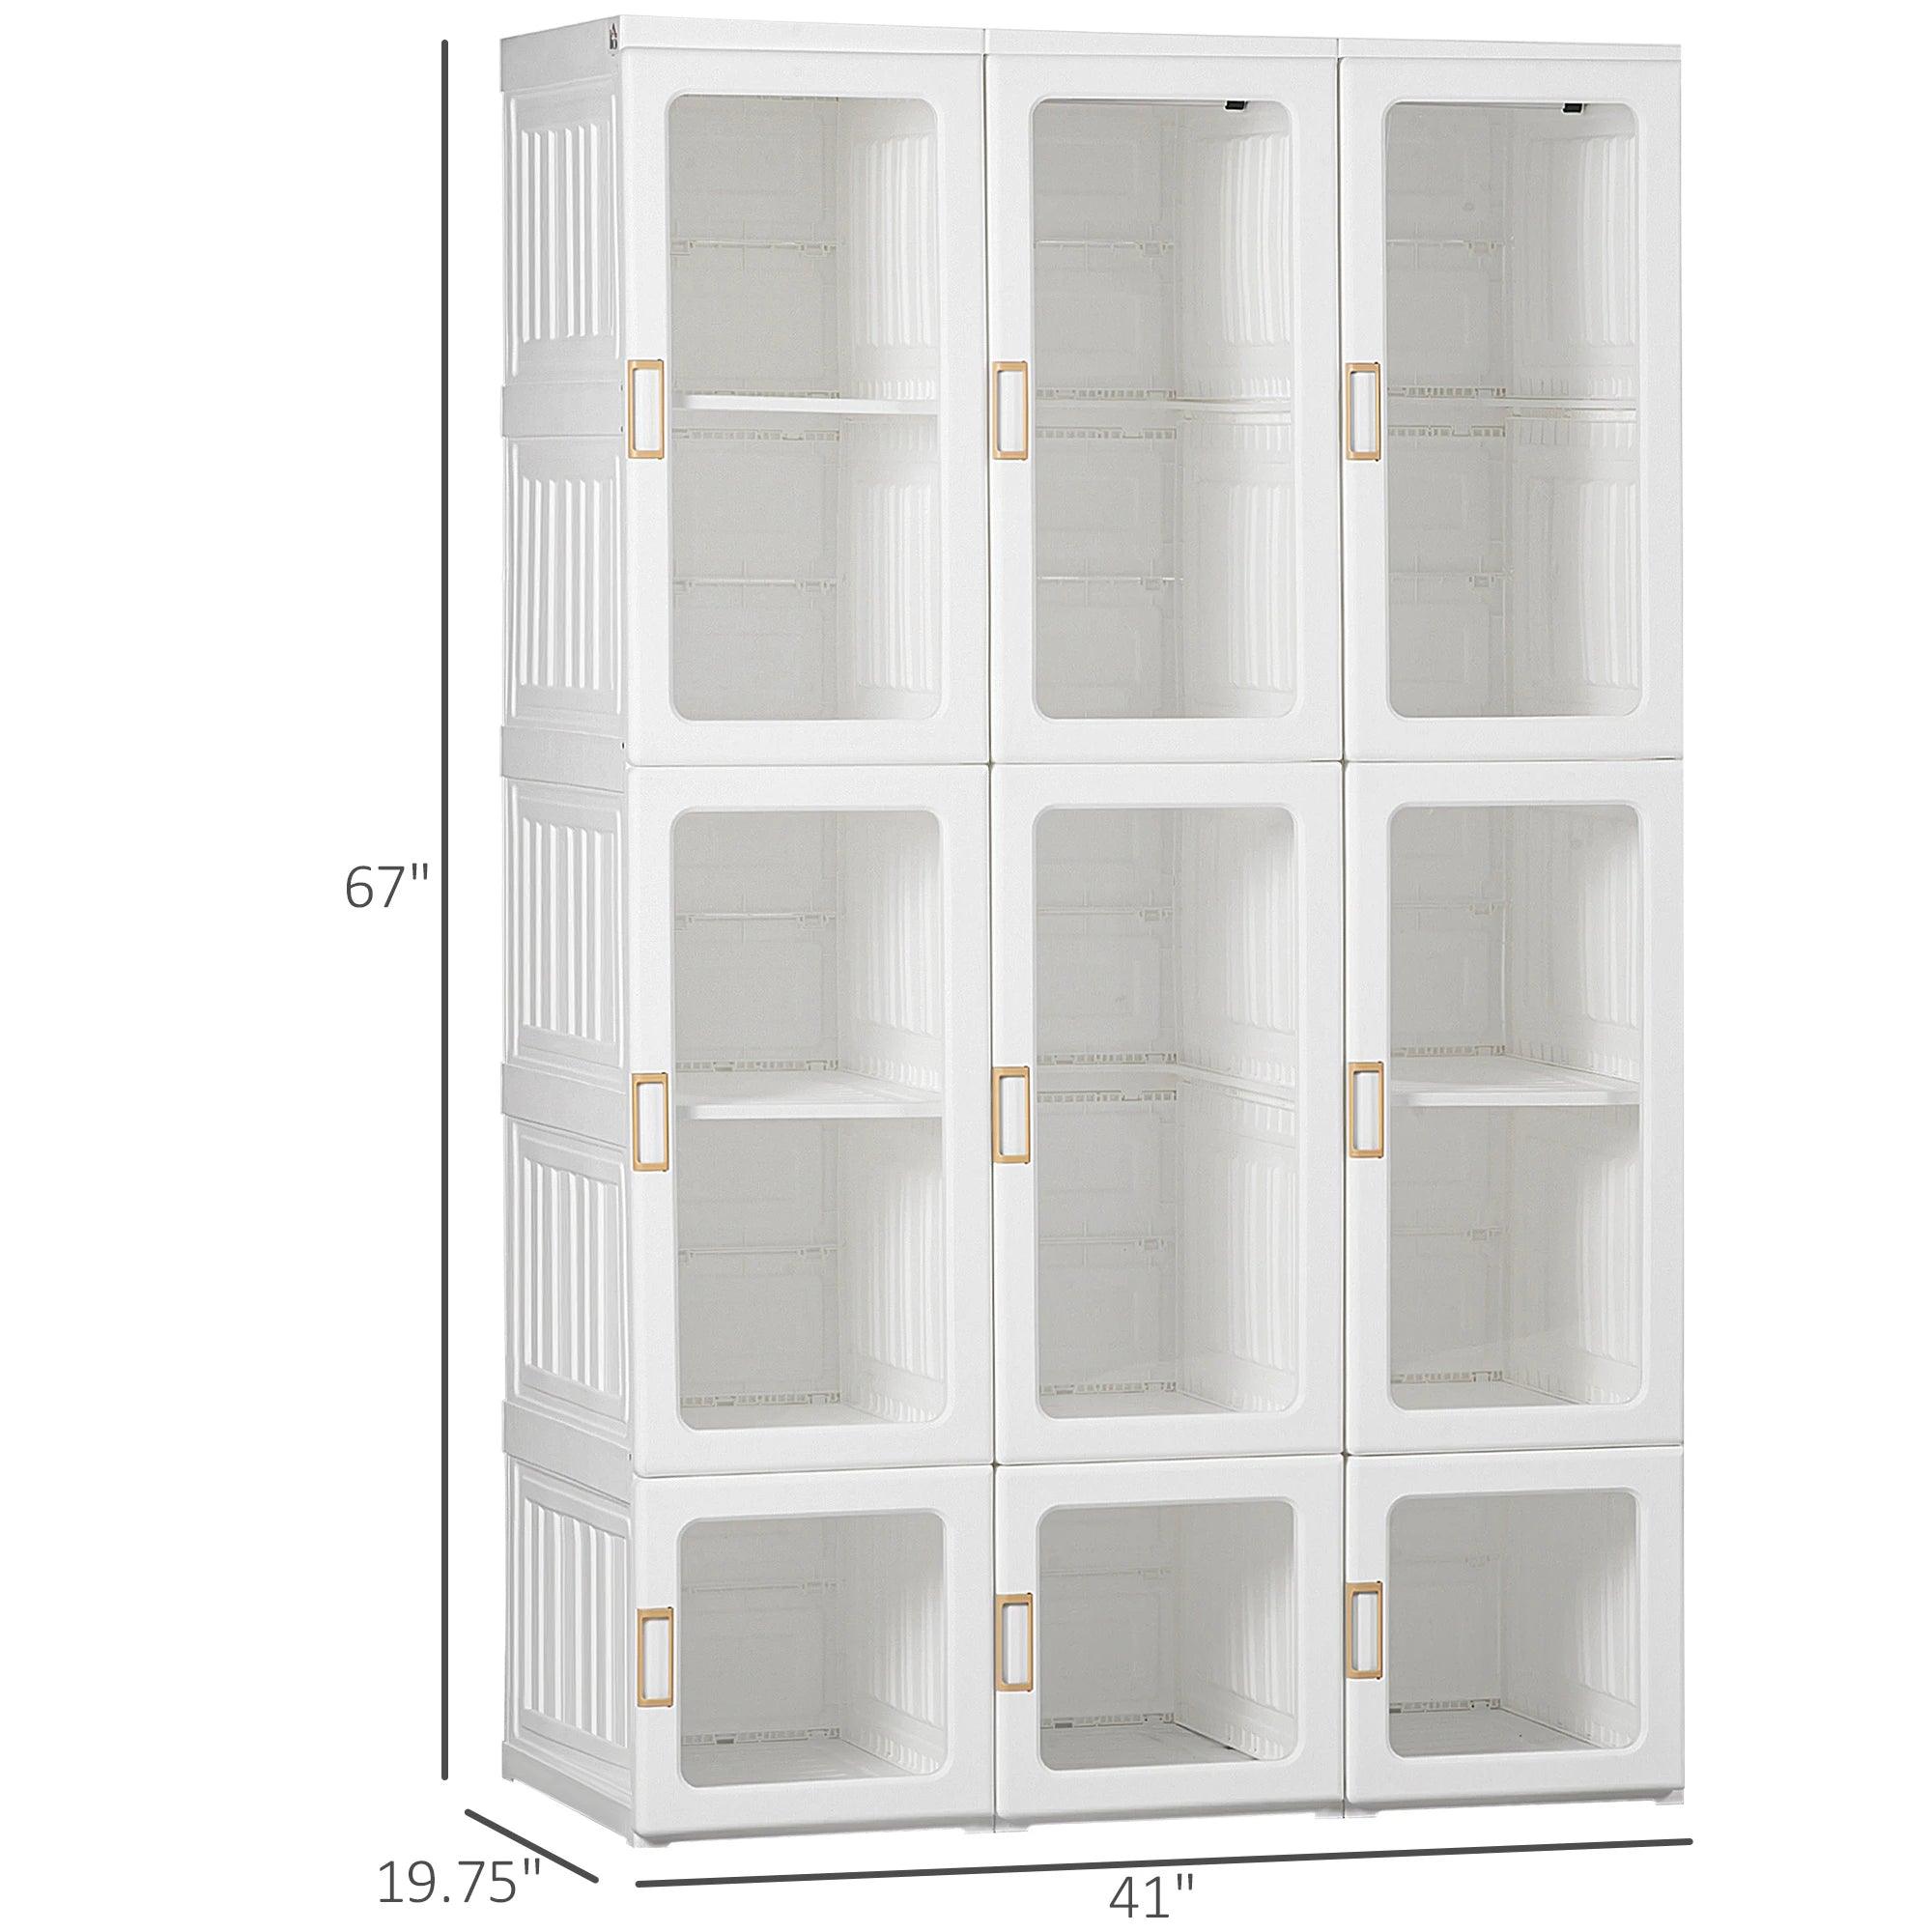 Portable Wardrobe Closet, Bedroom Armoire, Foldable Clothes Organizer with Cube Storage, Hanging Rods, Magnet Doors, White